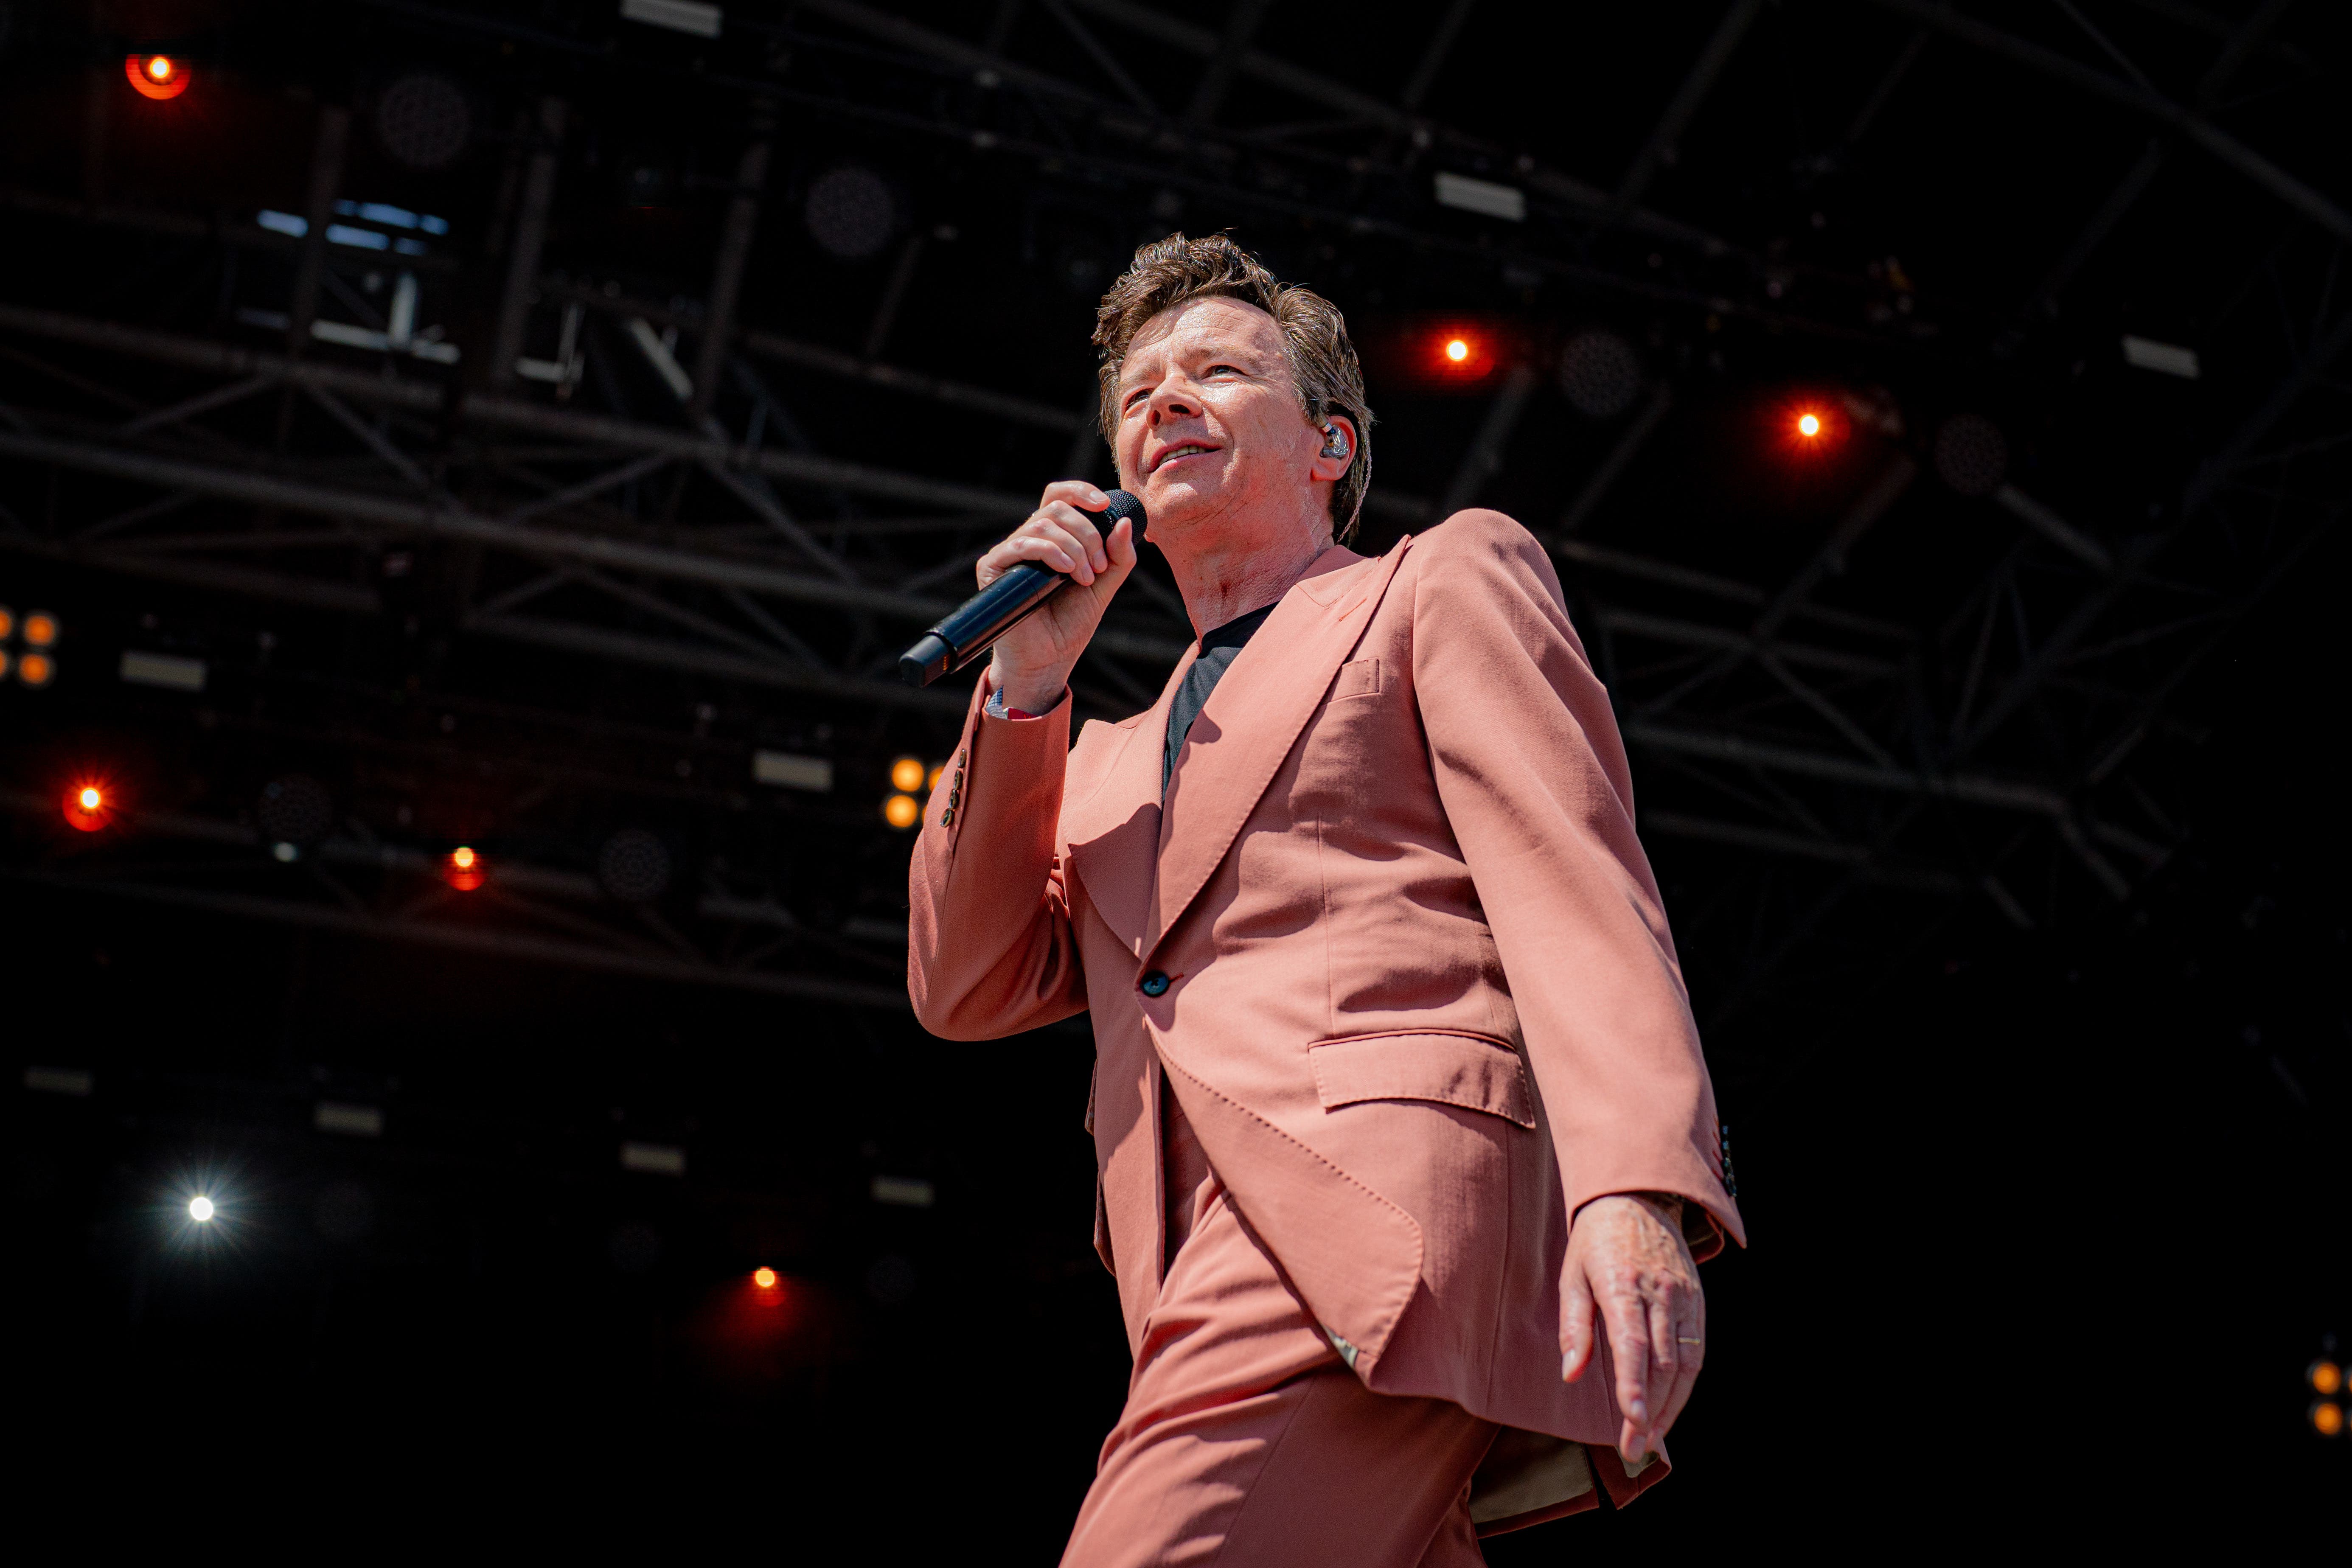 Rick Astley covers Harry Styles and AC/DC during Glastonbury Pyramid